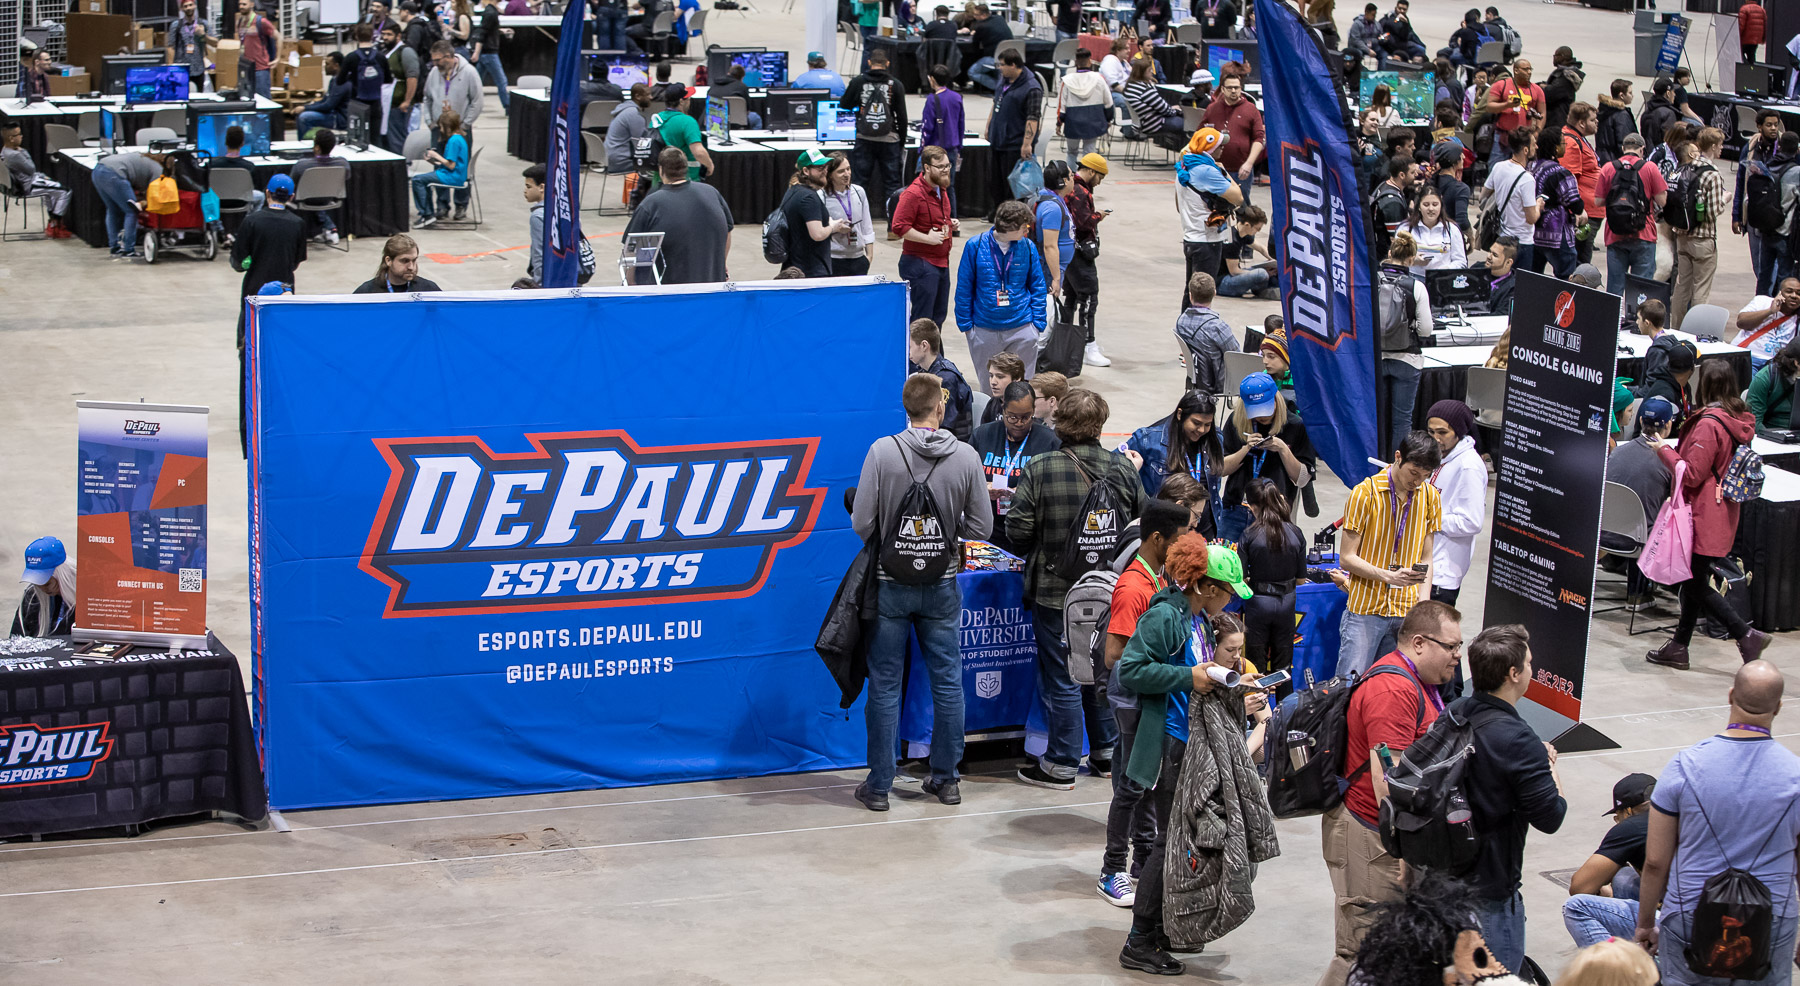 The Game Zone featured console games such as Smash Brothers that attendees could play while learning about DePaul's Esports program. (DePaul University/Jeff Carrion)